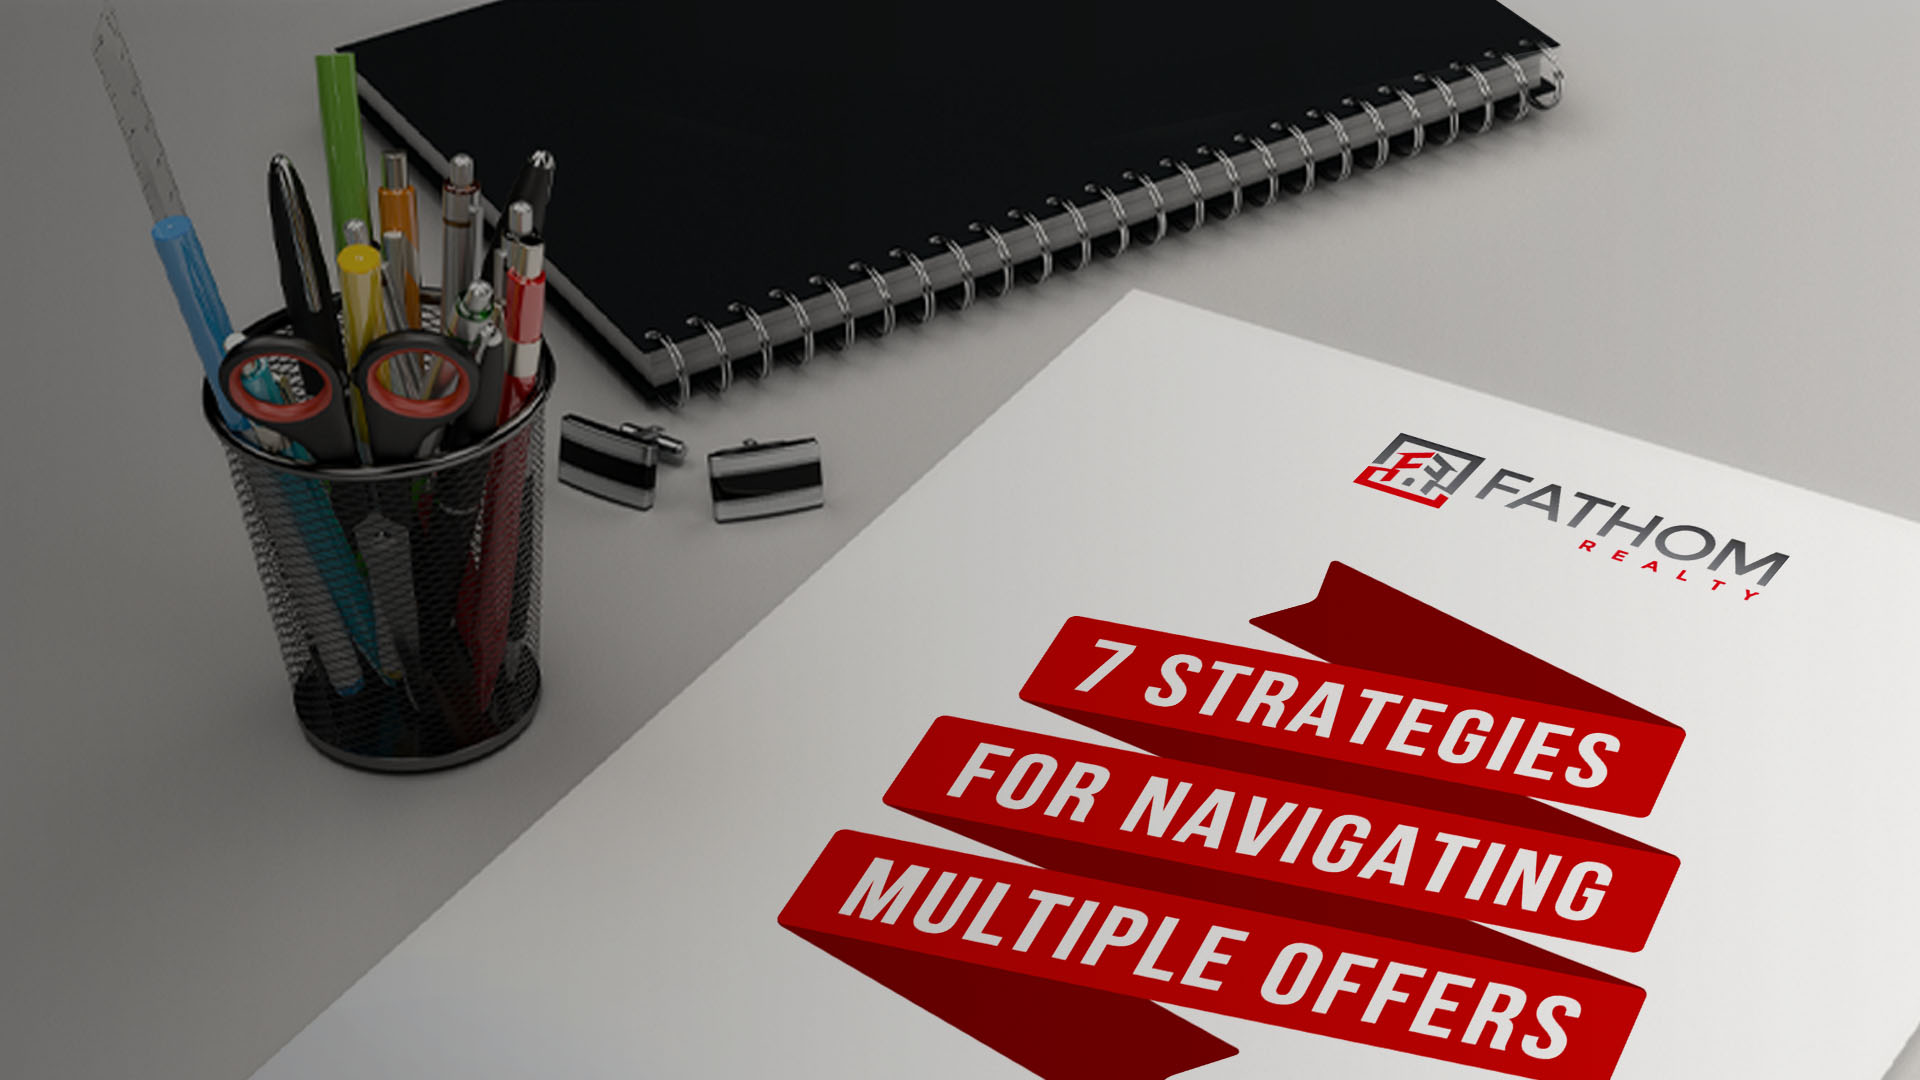 Featured image for “7 Strategies for Navigating Multiple Offers”